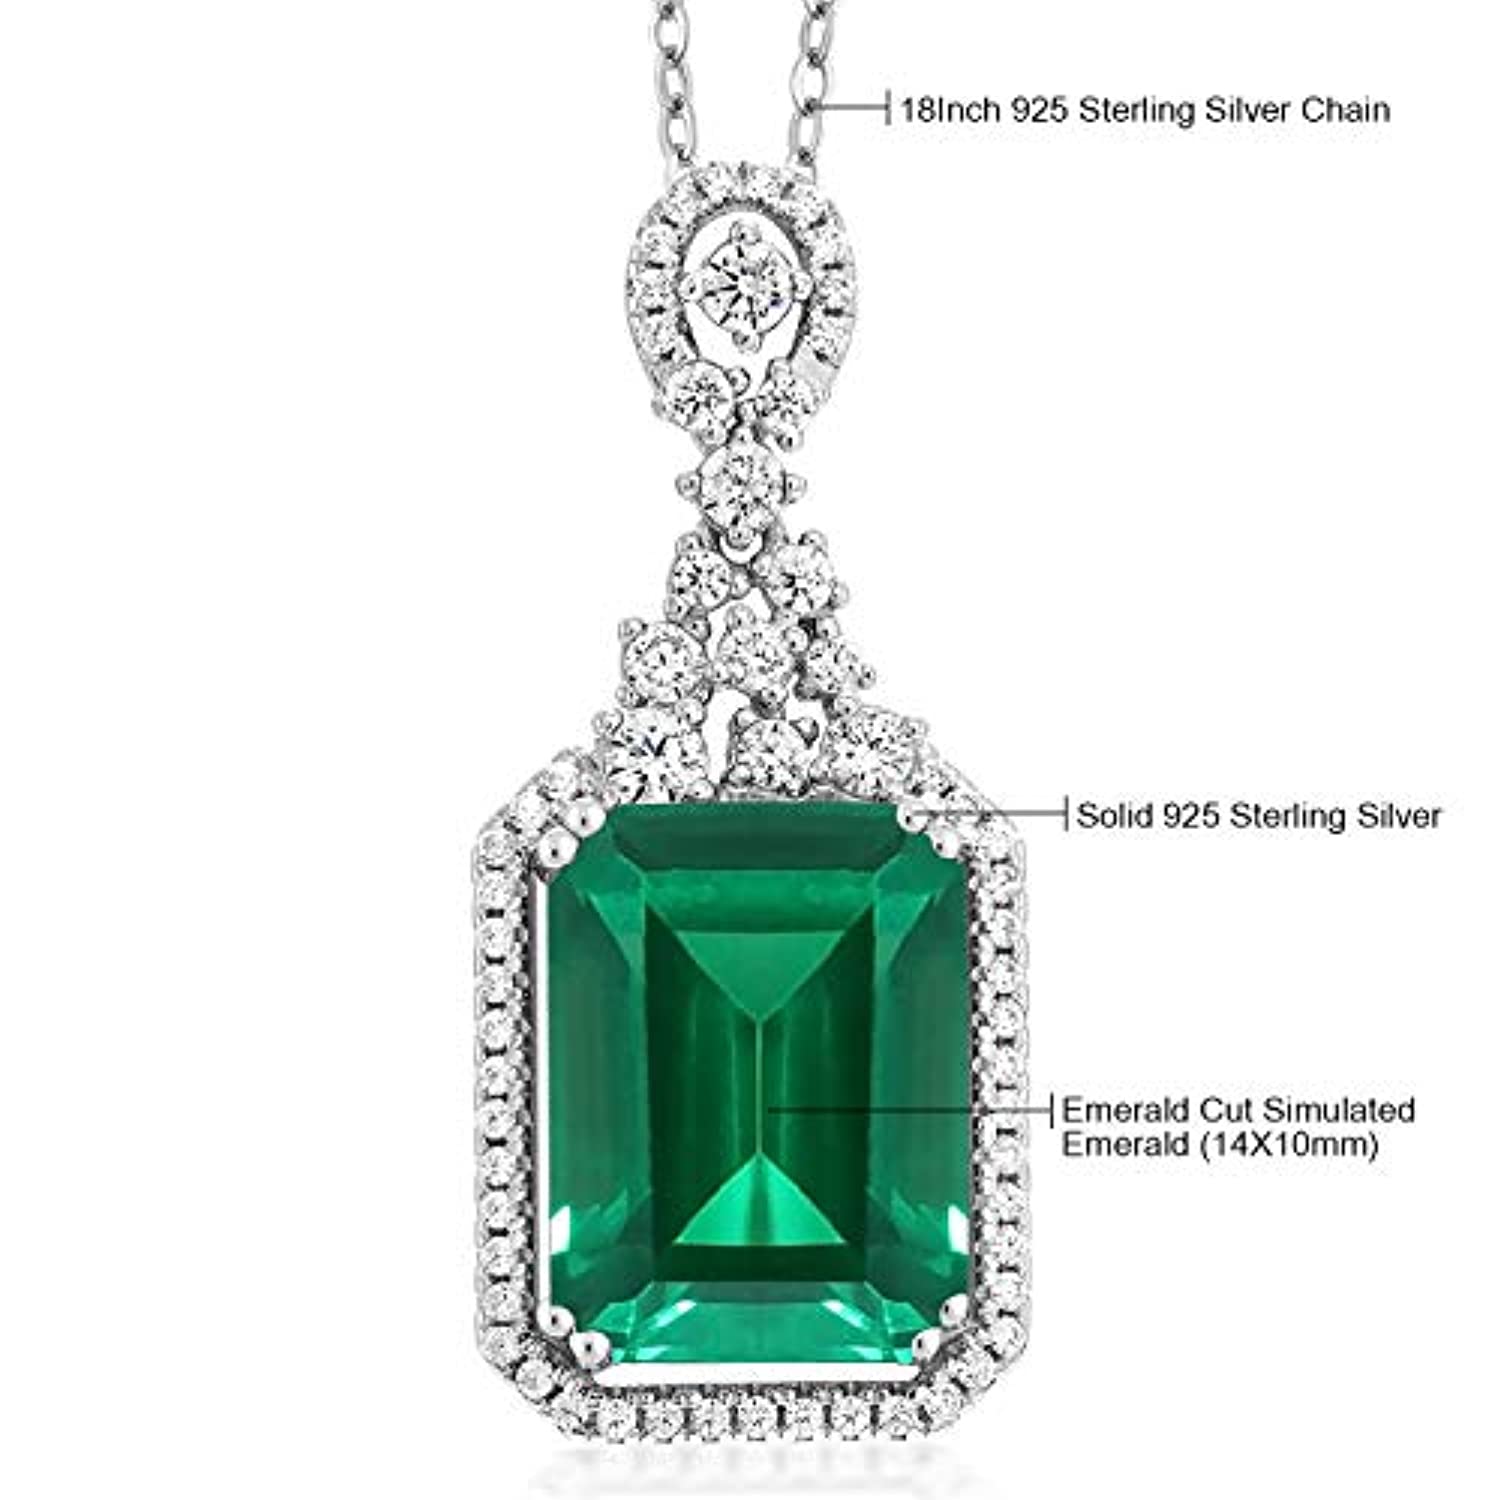 Sterling Silver Green Simulated Emerald Pendant Necklace 7.10 cttw Emerald Cut 14X10MM with 18 Inch Silver Chain